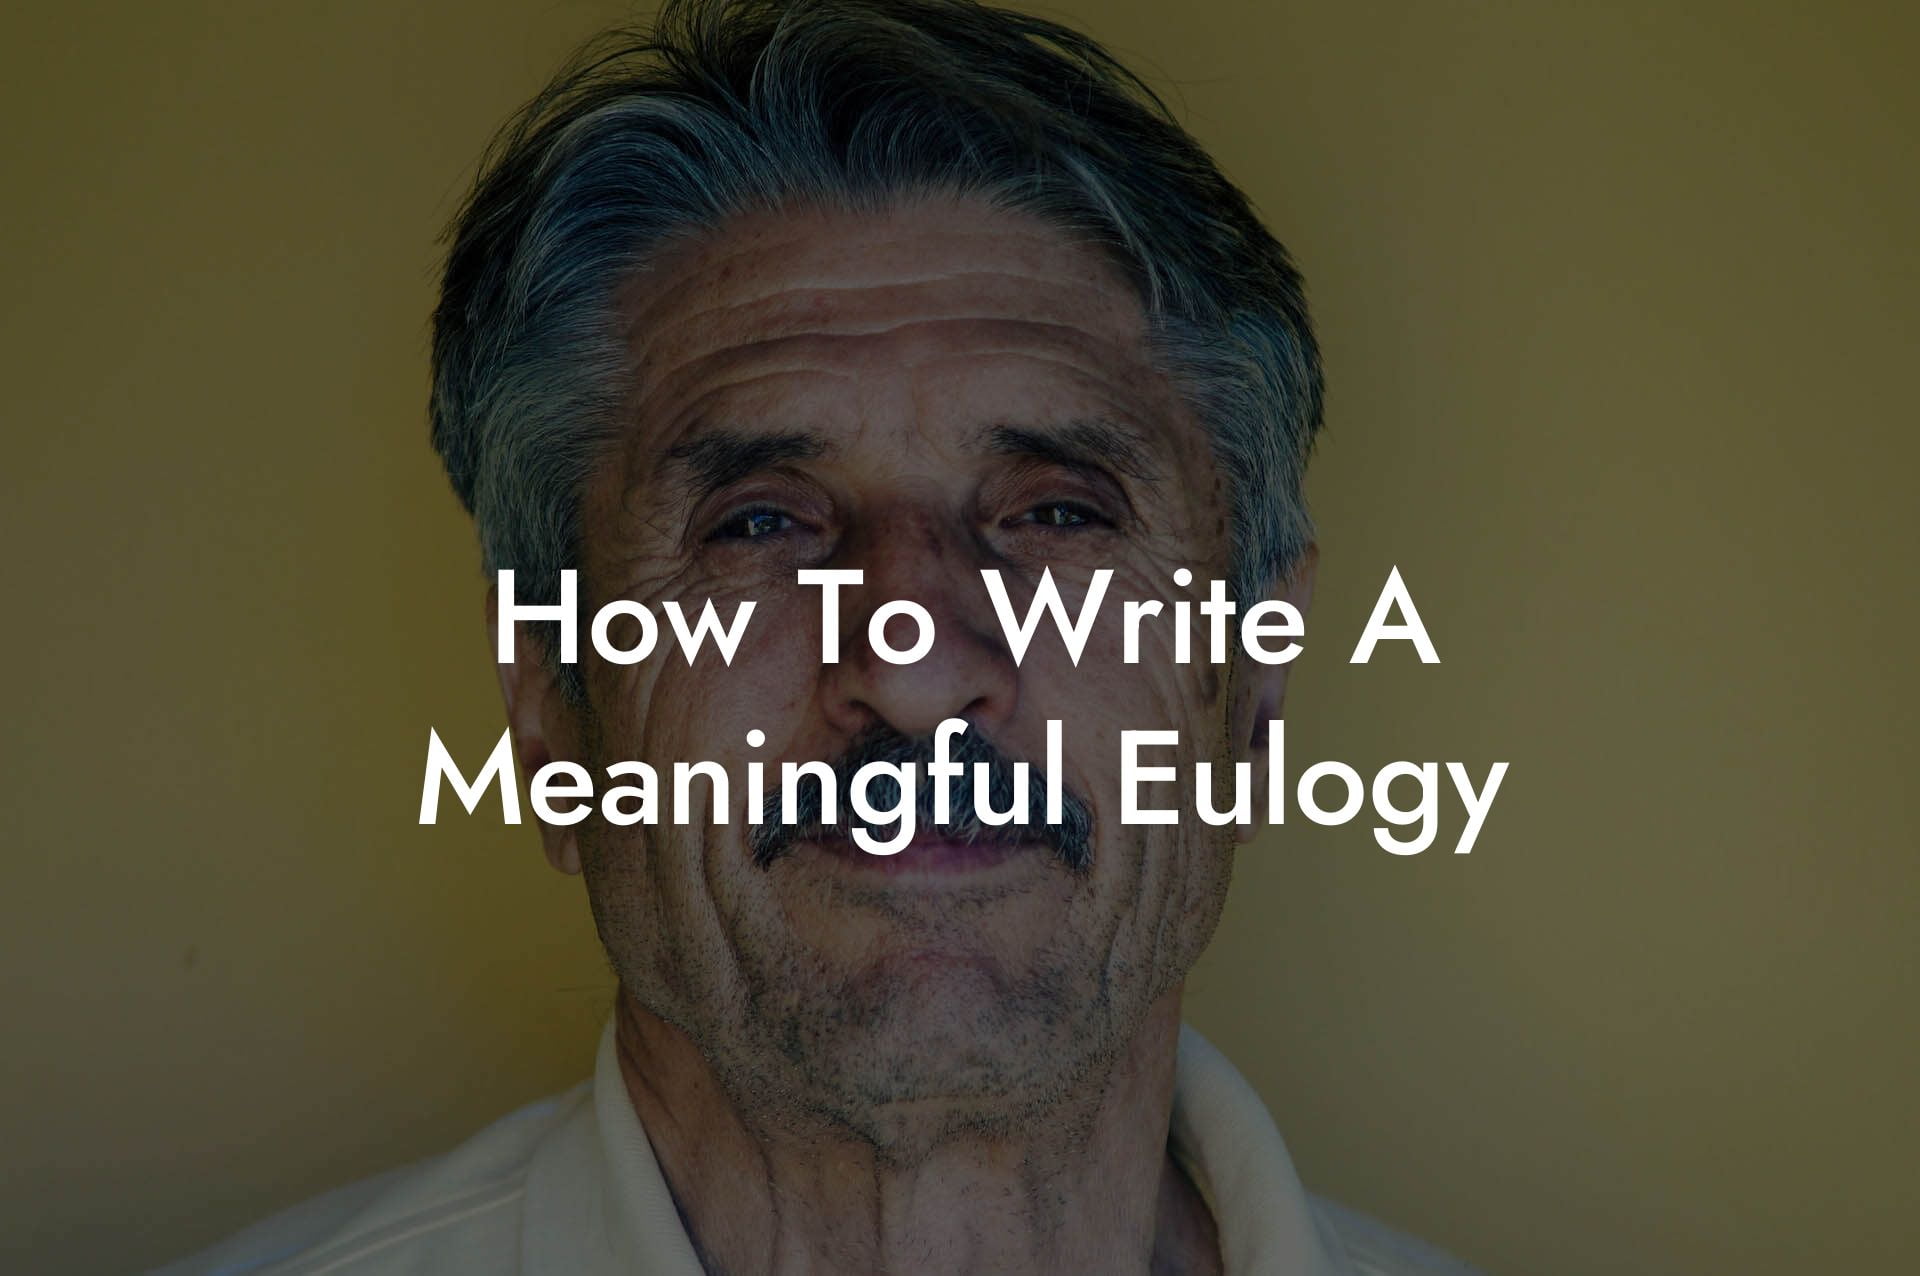 How To Write A Meaningful Eulogy